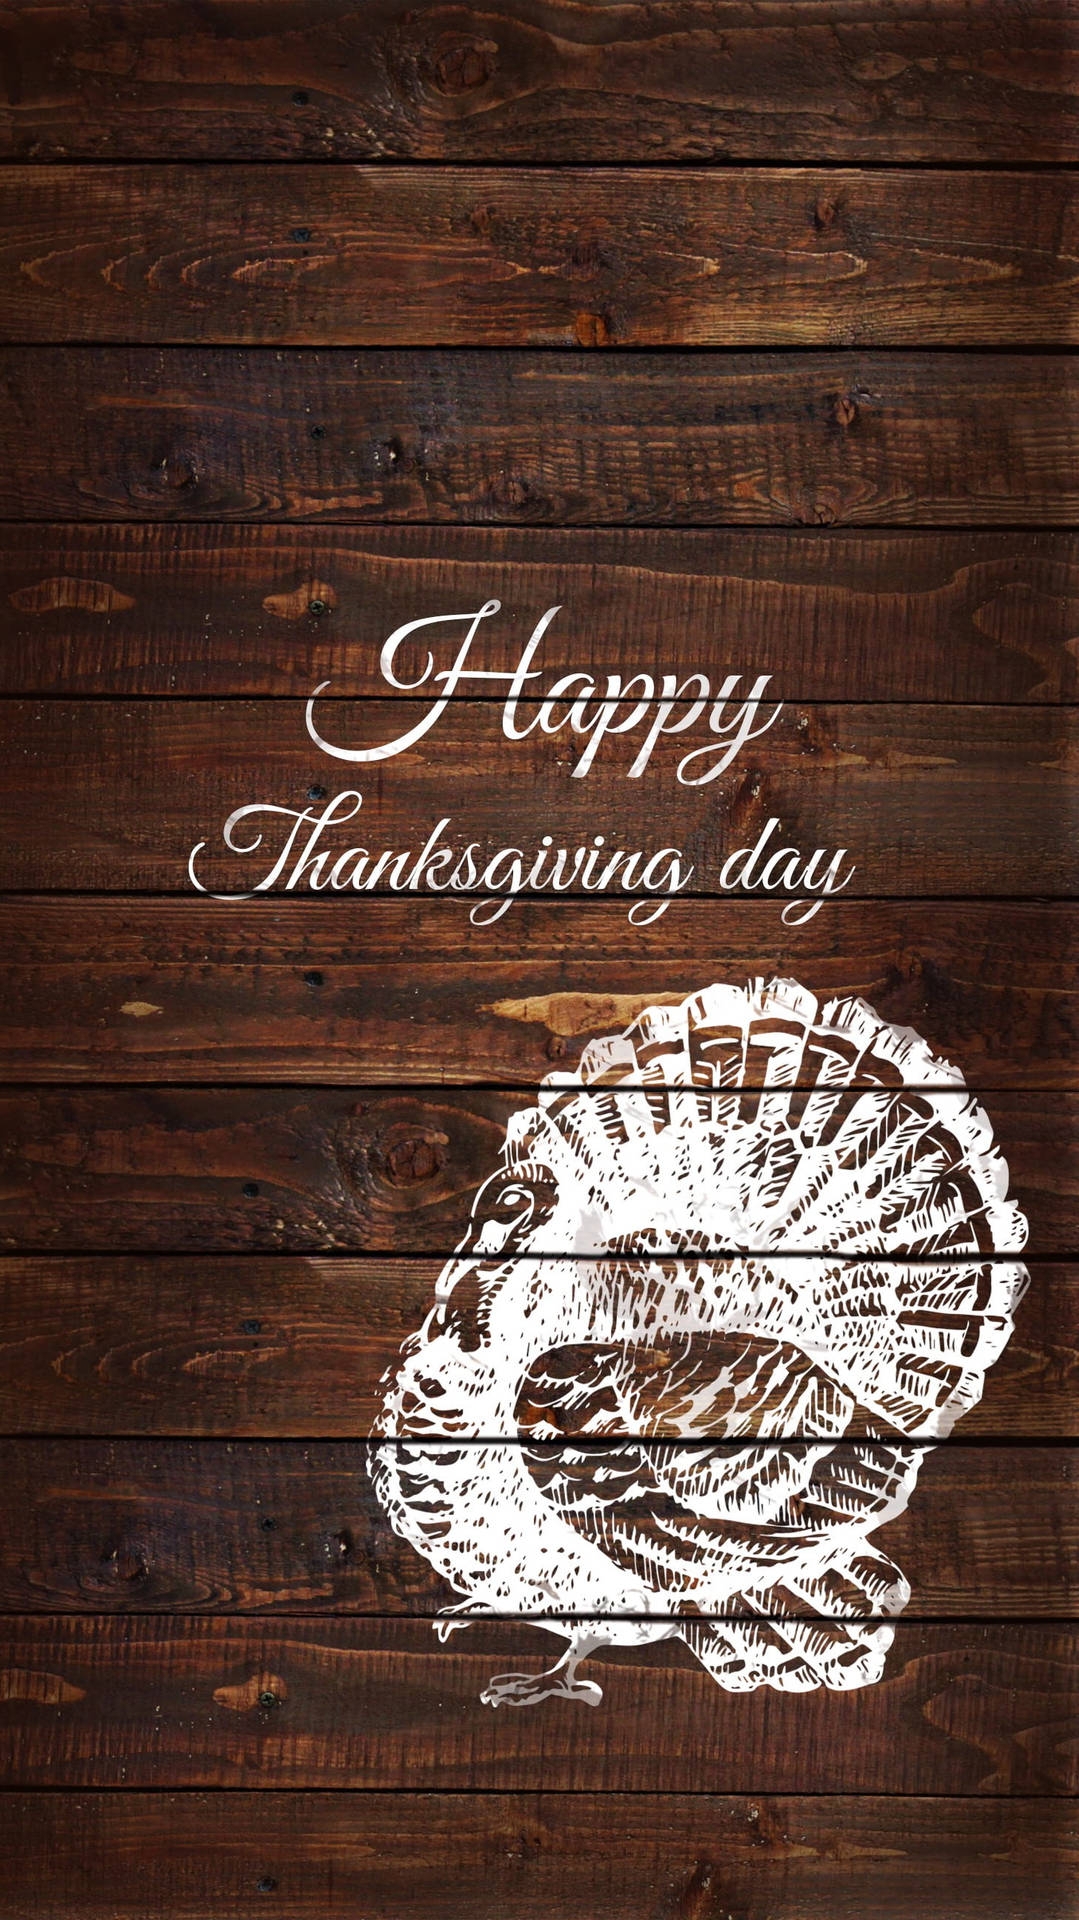 Happy Thanksgiving Greetings On Wood Background Iphone Wallpaper